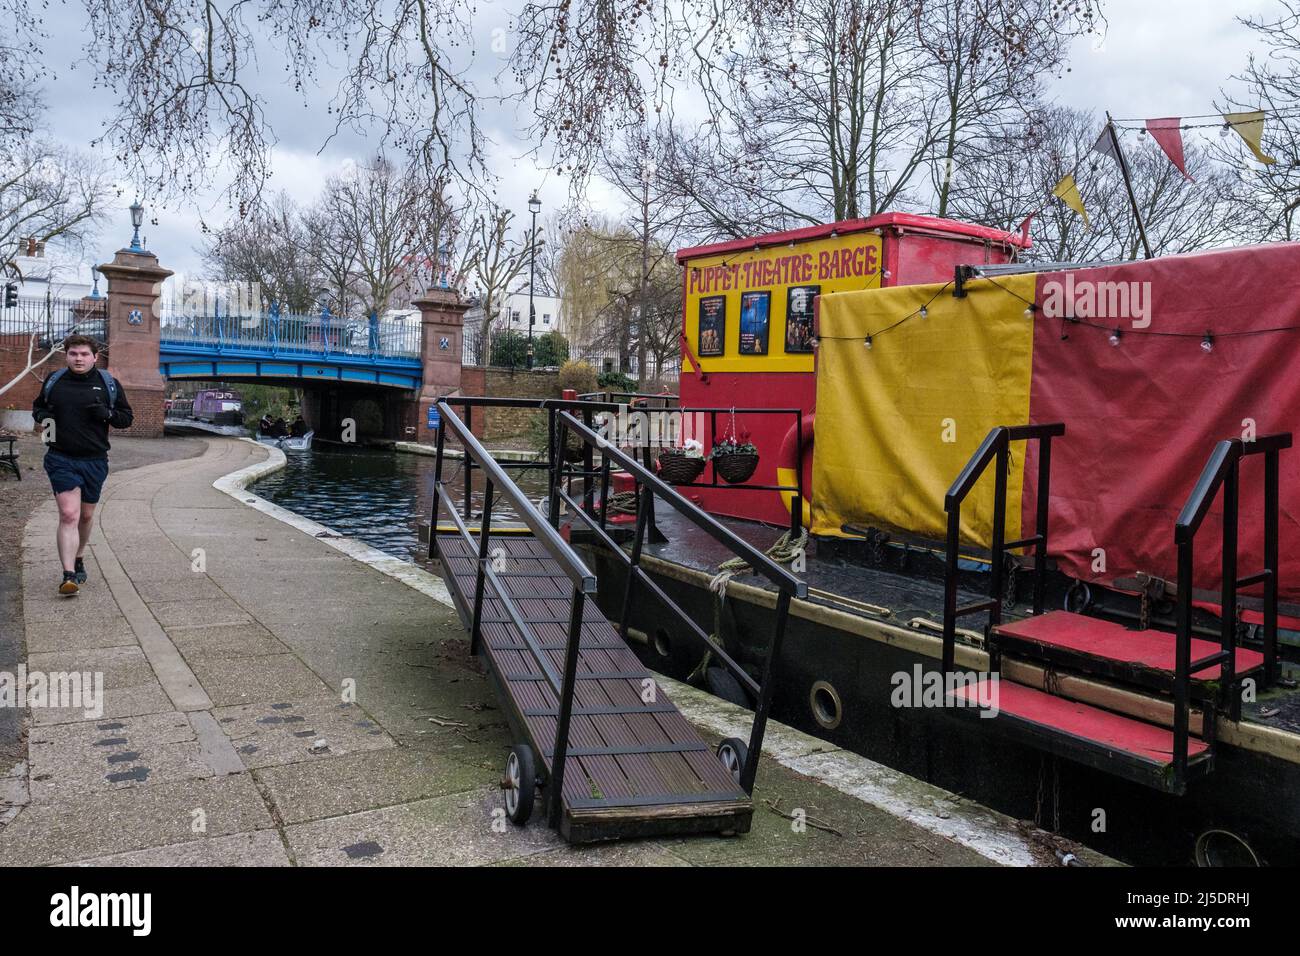 Man walks along Regent’s Canal tow path at Blomfield Road, Little Venice next to Puppet Theatre Barge. Warwick Avenue in background. West London, UK. Stock Photo